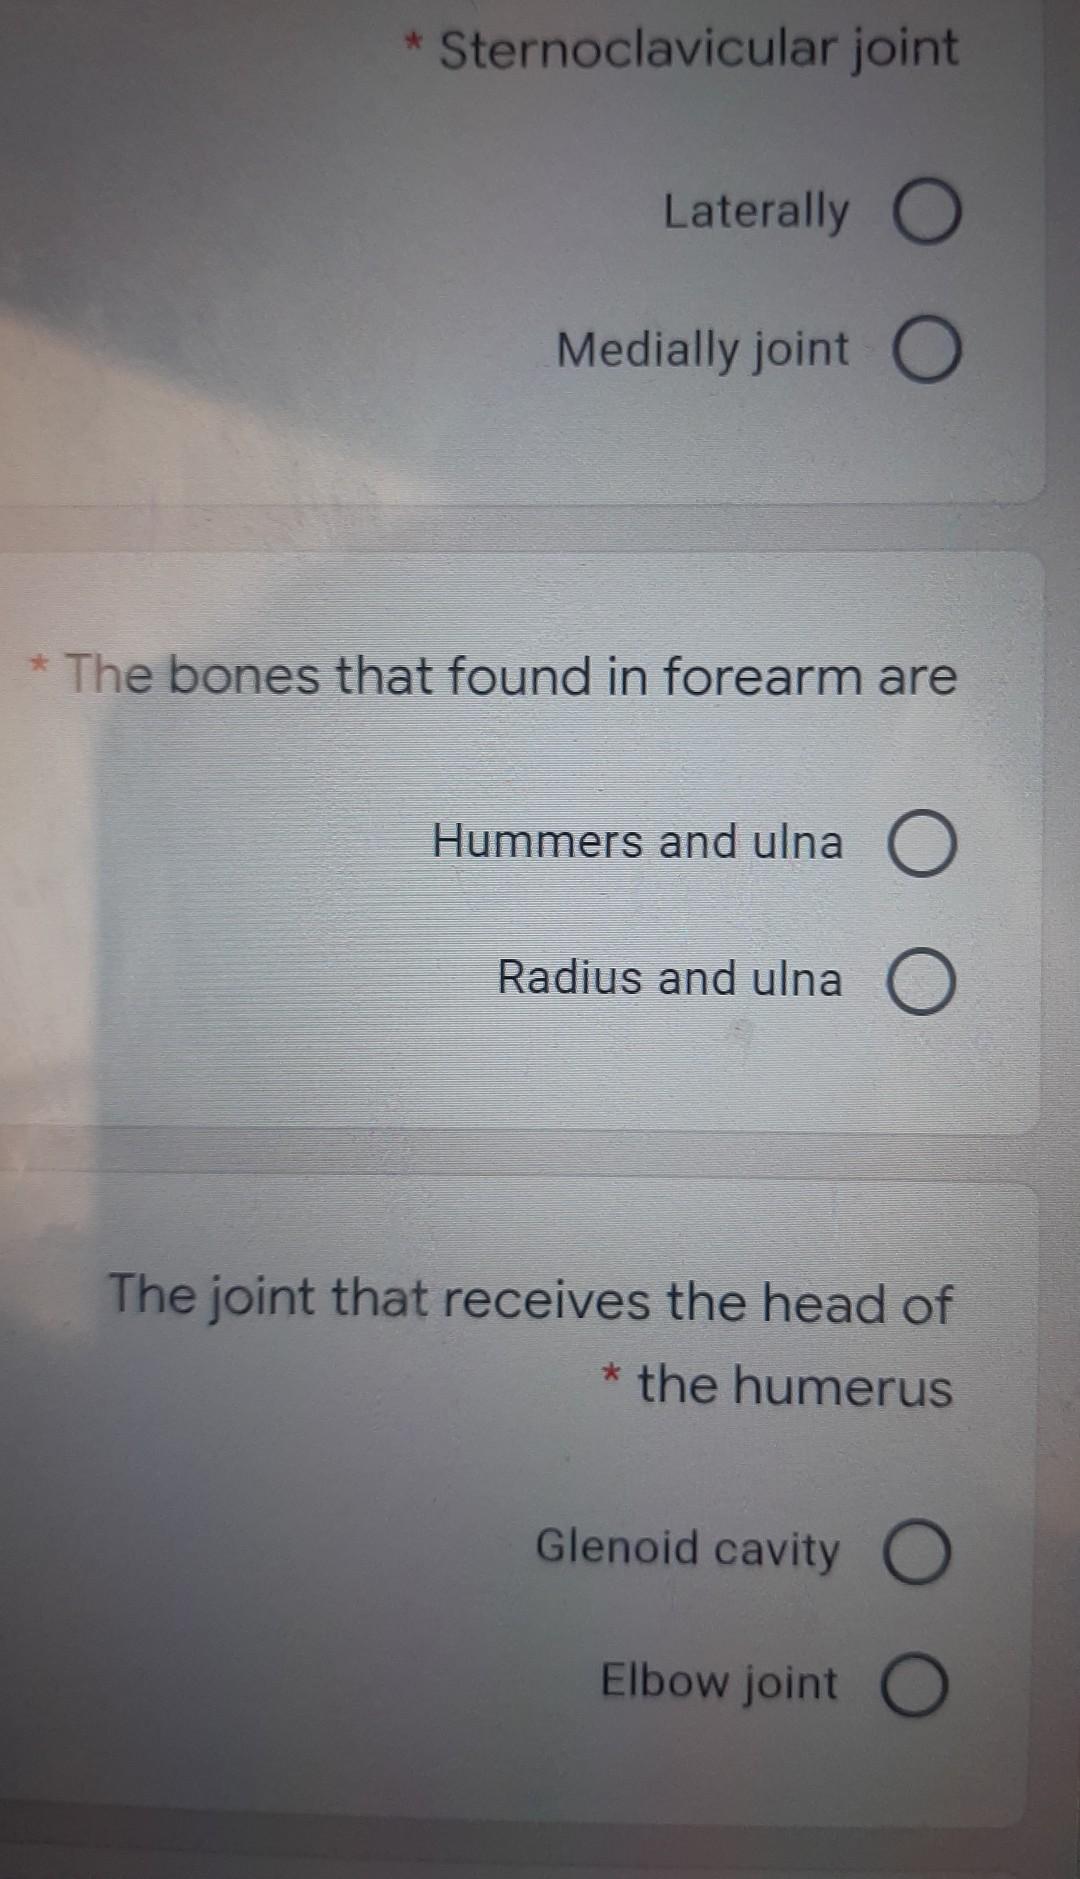 * Sternoclavicular joint Laterally O Medially joint O * The bones that found in forearm are Hummers and ulna O Radius and uln